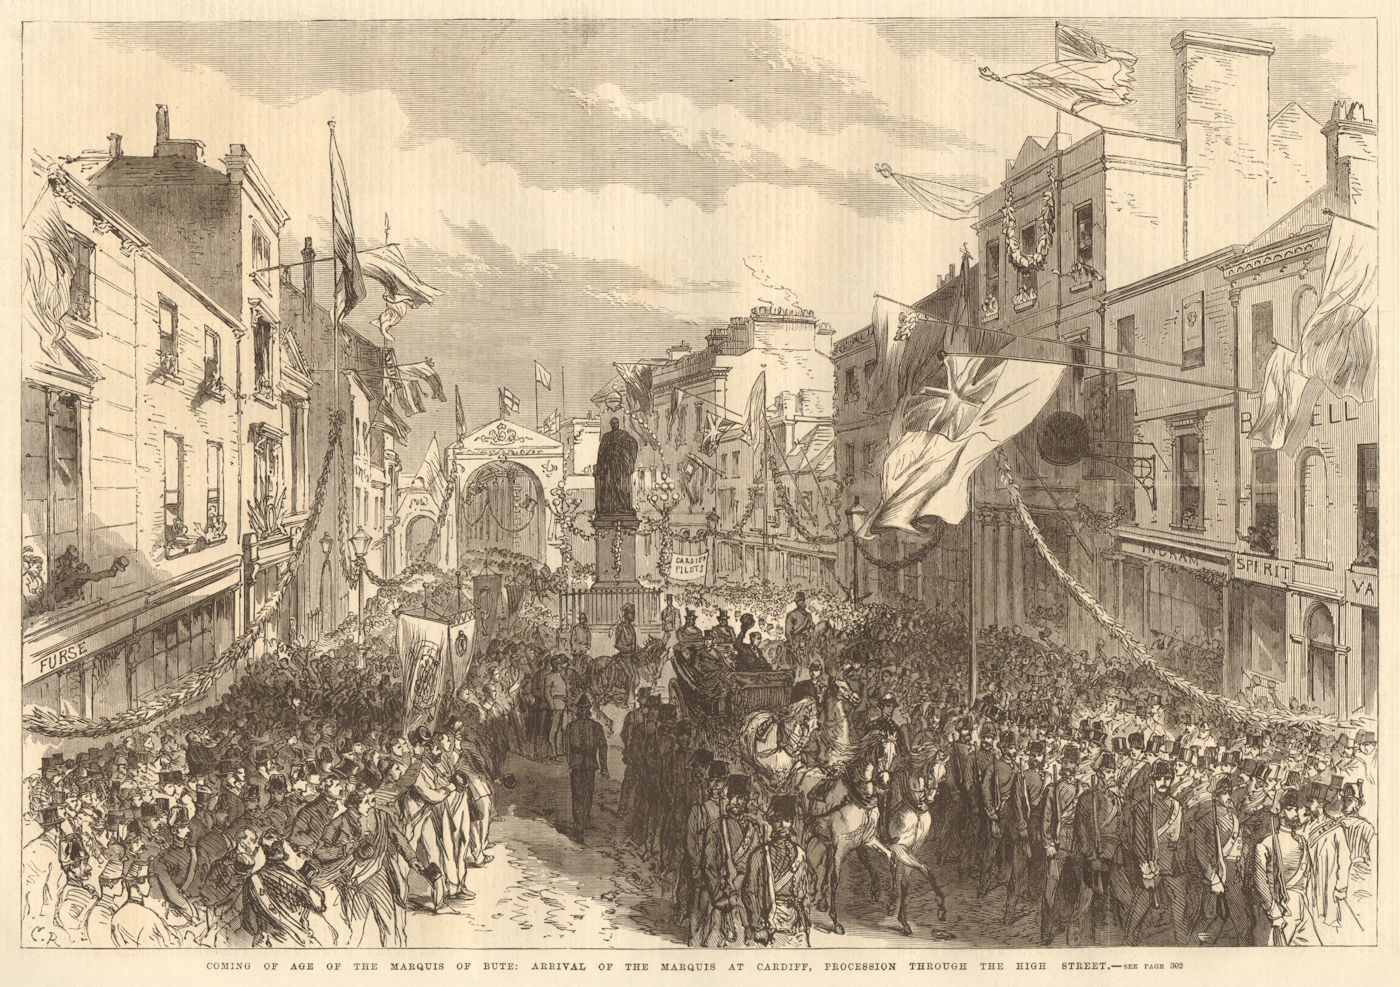 Associate Product The Marquis of Bute's coming of age. Procession through Cardiff High Street 1868